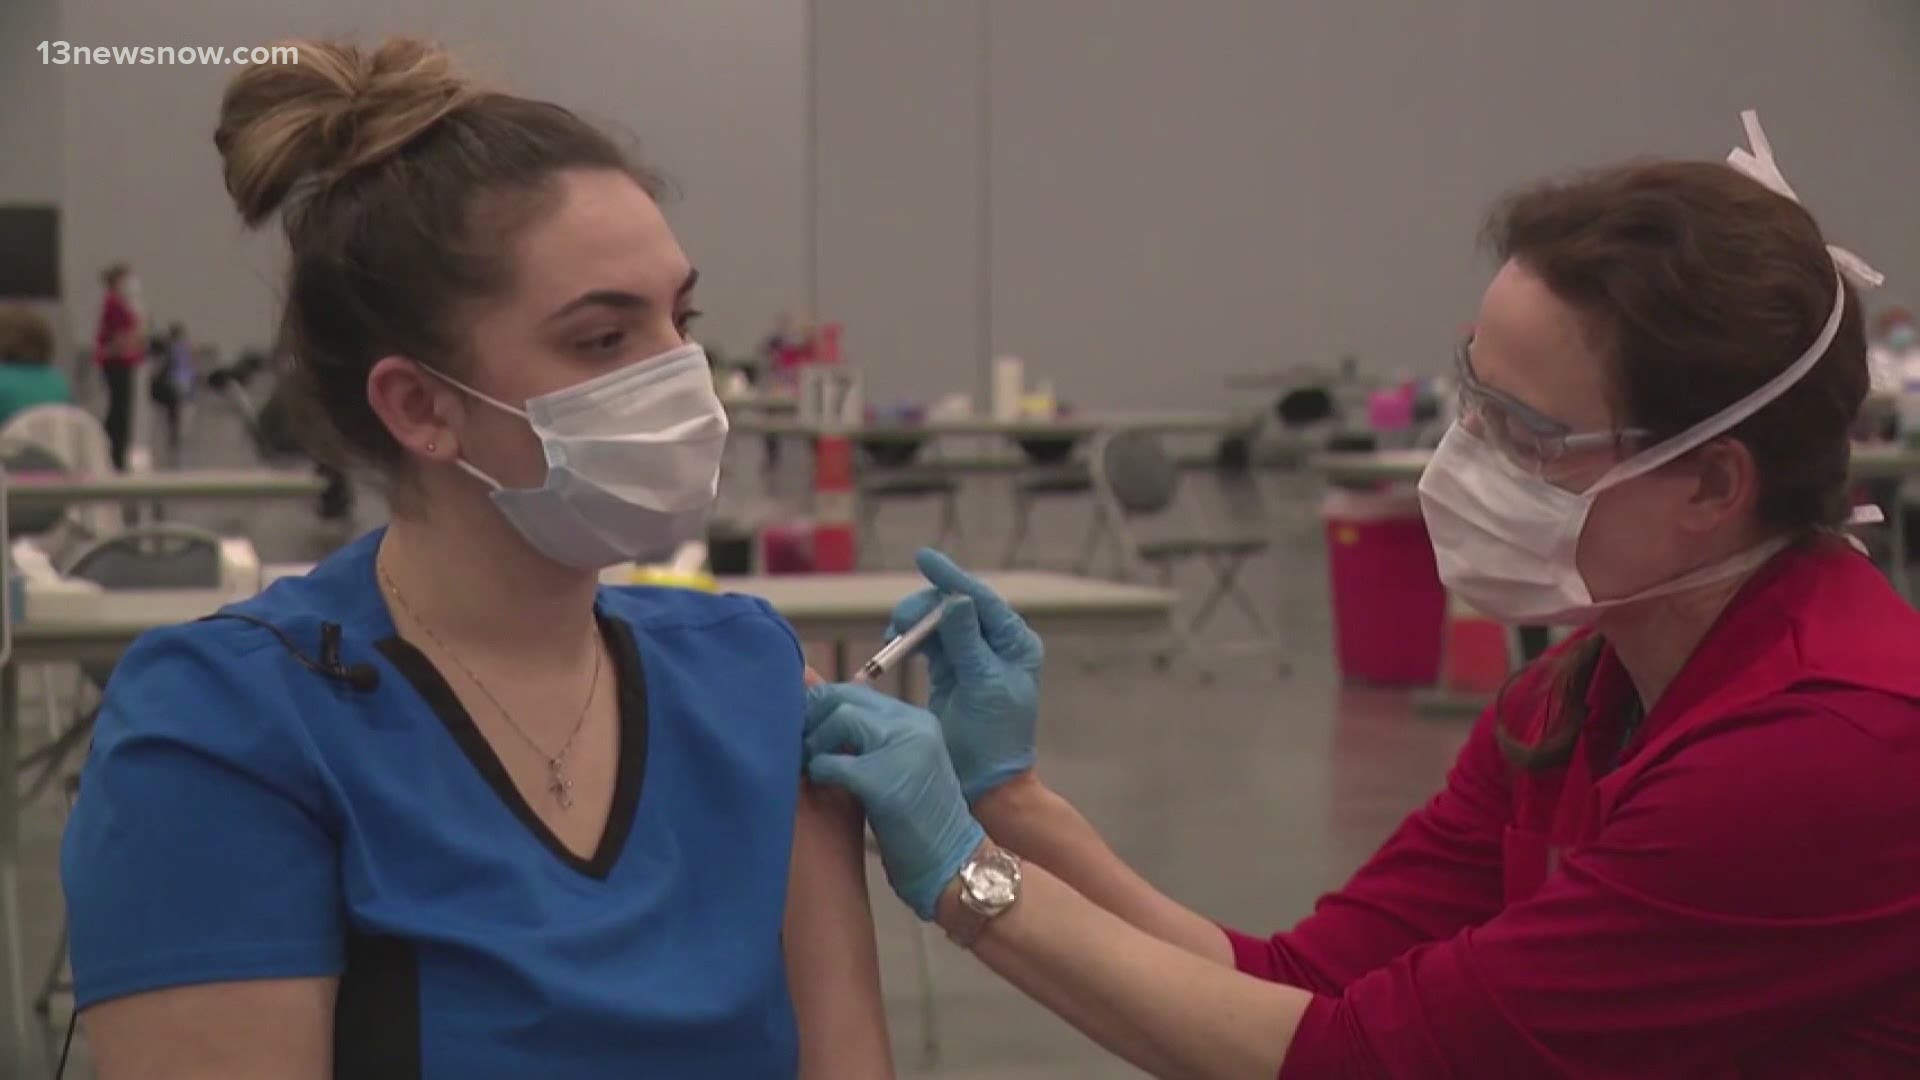 People who qualify for a COVID-19 shot under Phase 1c and are pre-registered are now able to set appointments. 13News Now Anne Sparaco has more on pre-registering.